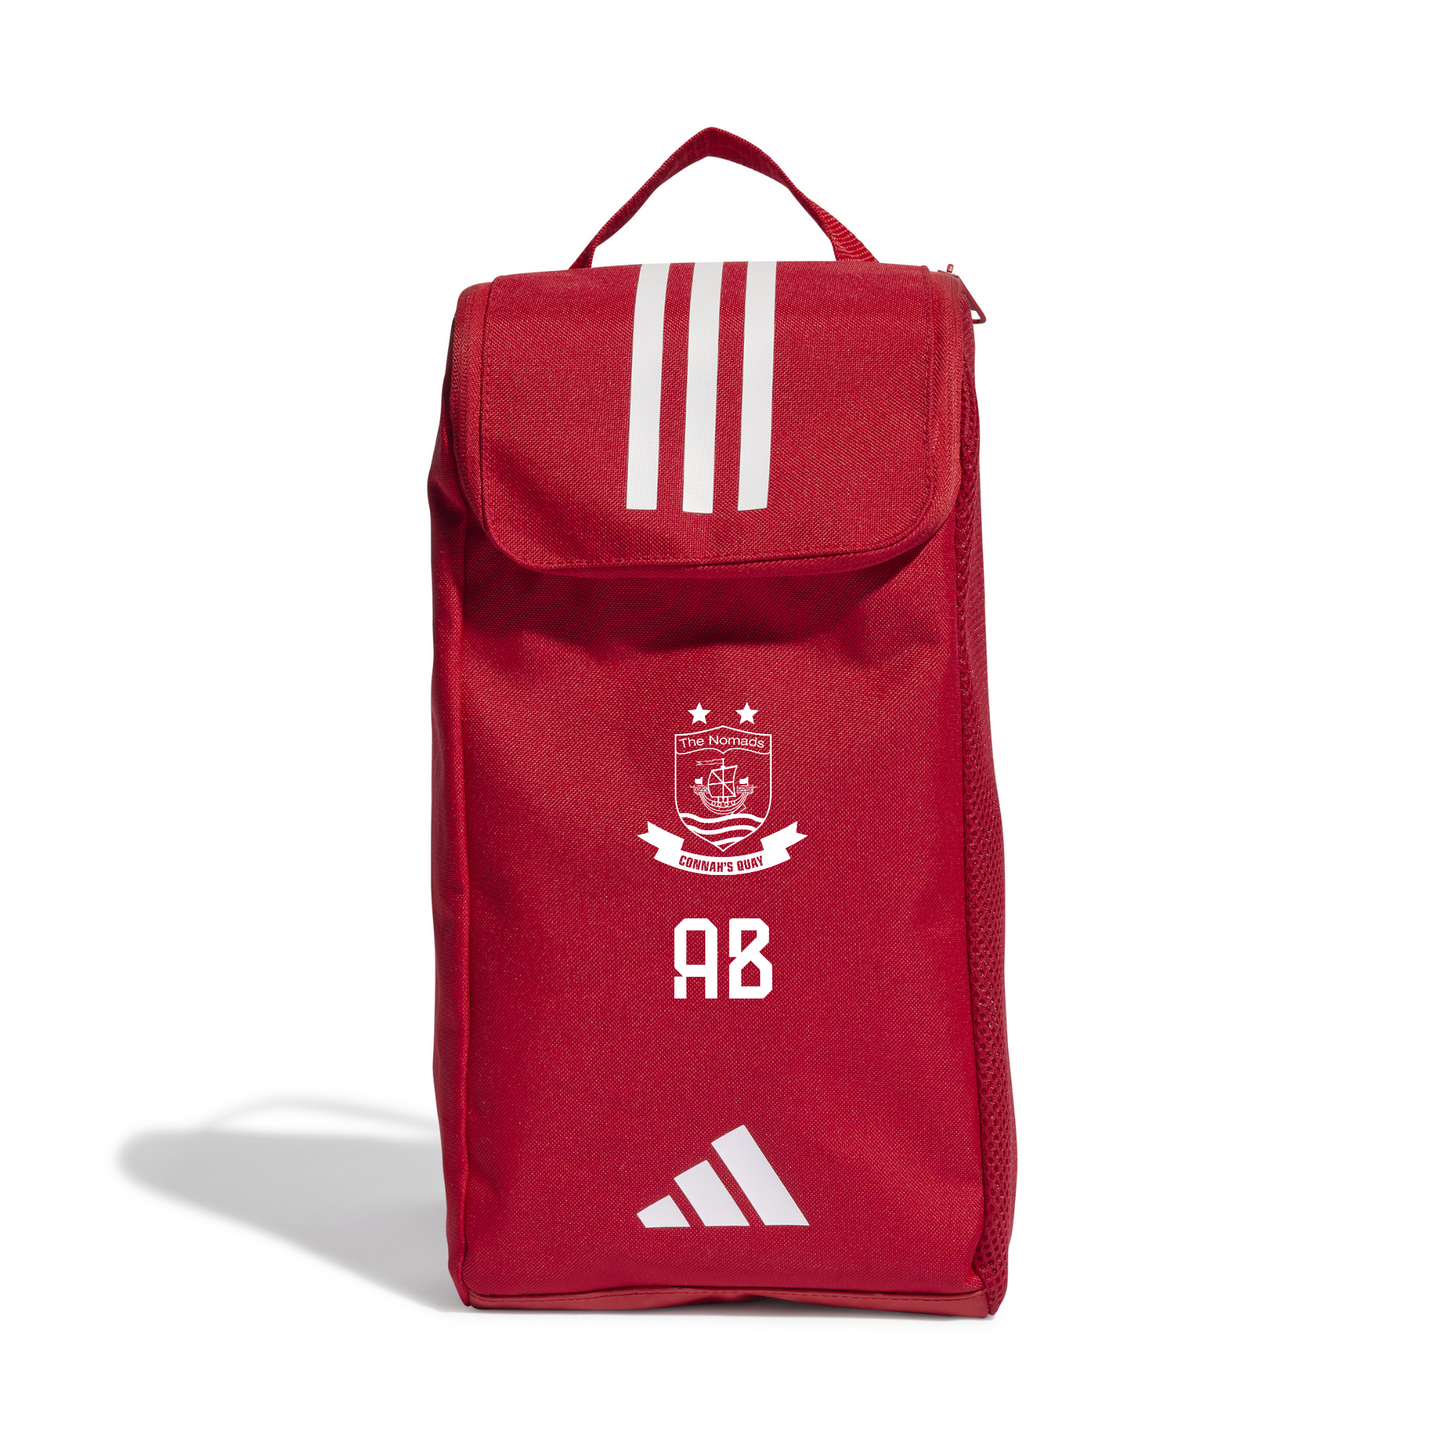 Nomads Academy Players Bootbag